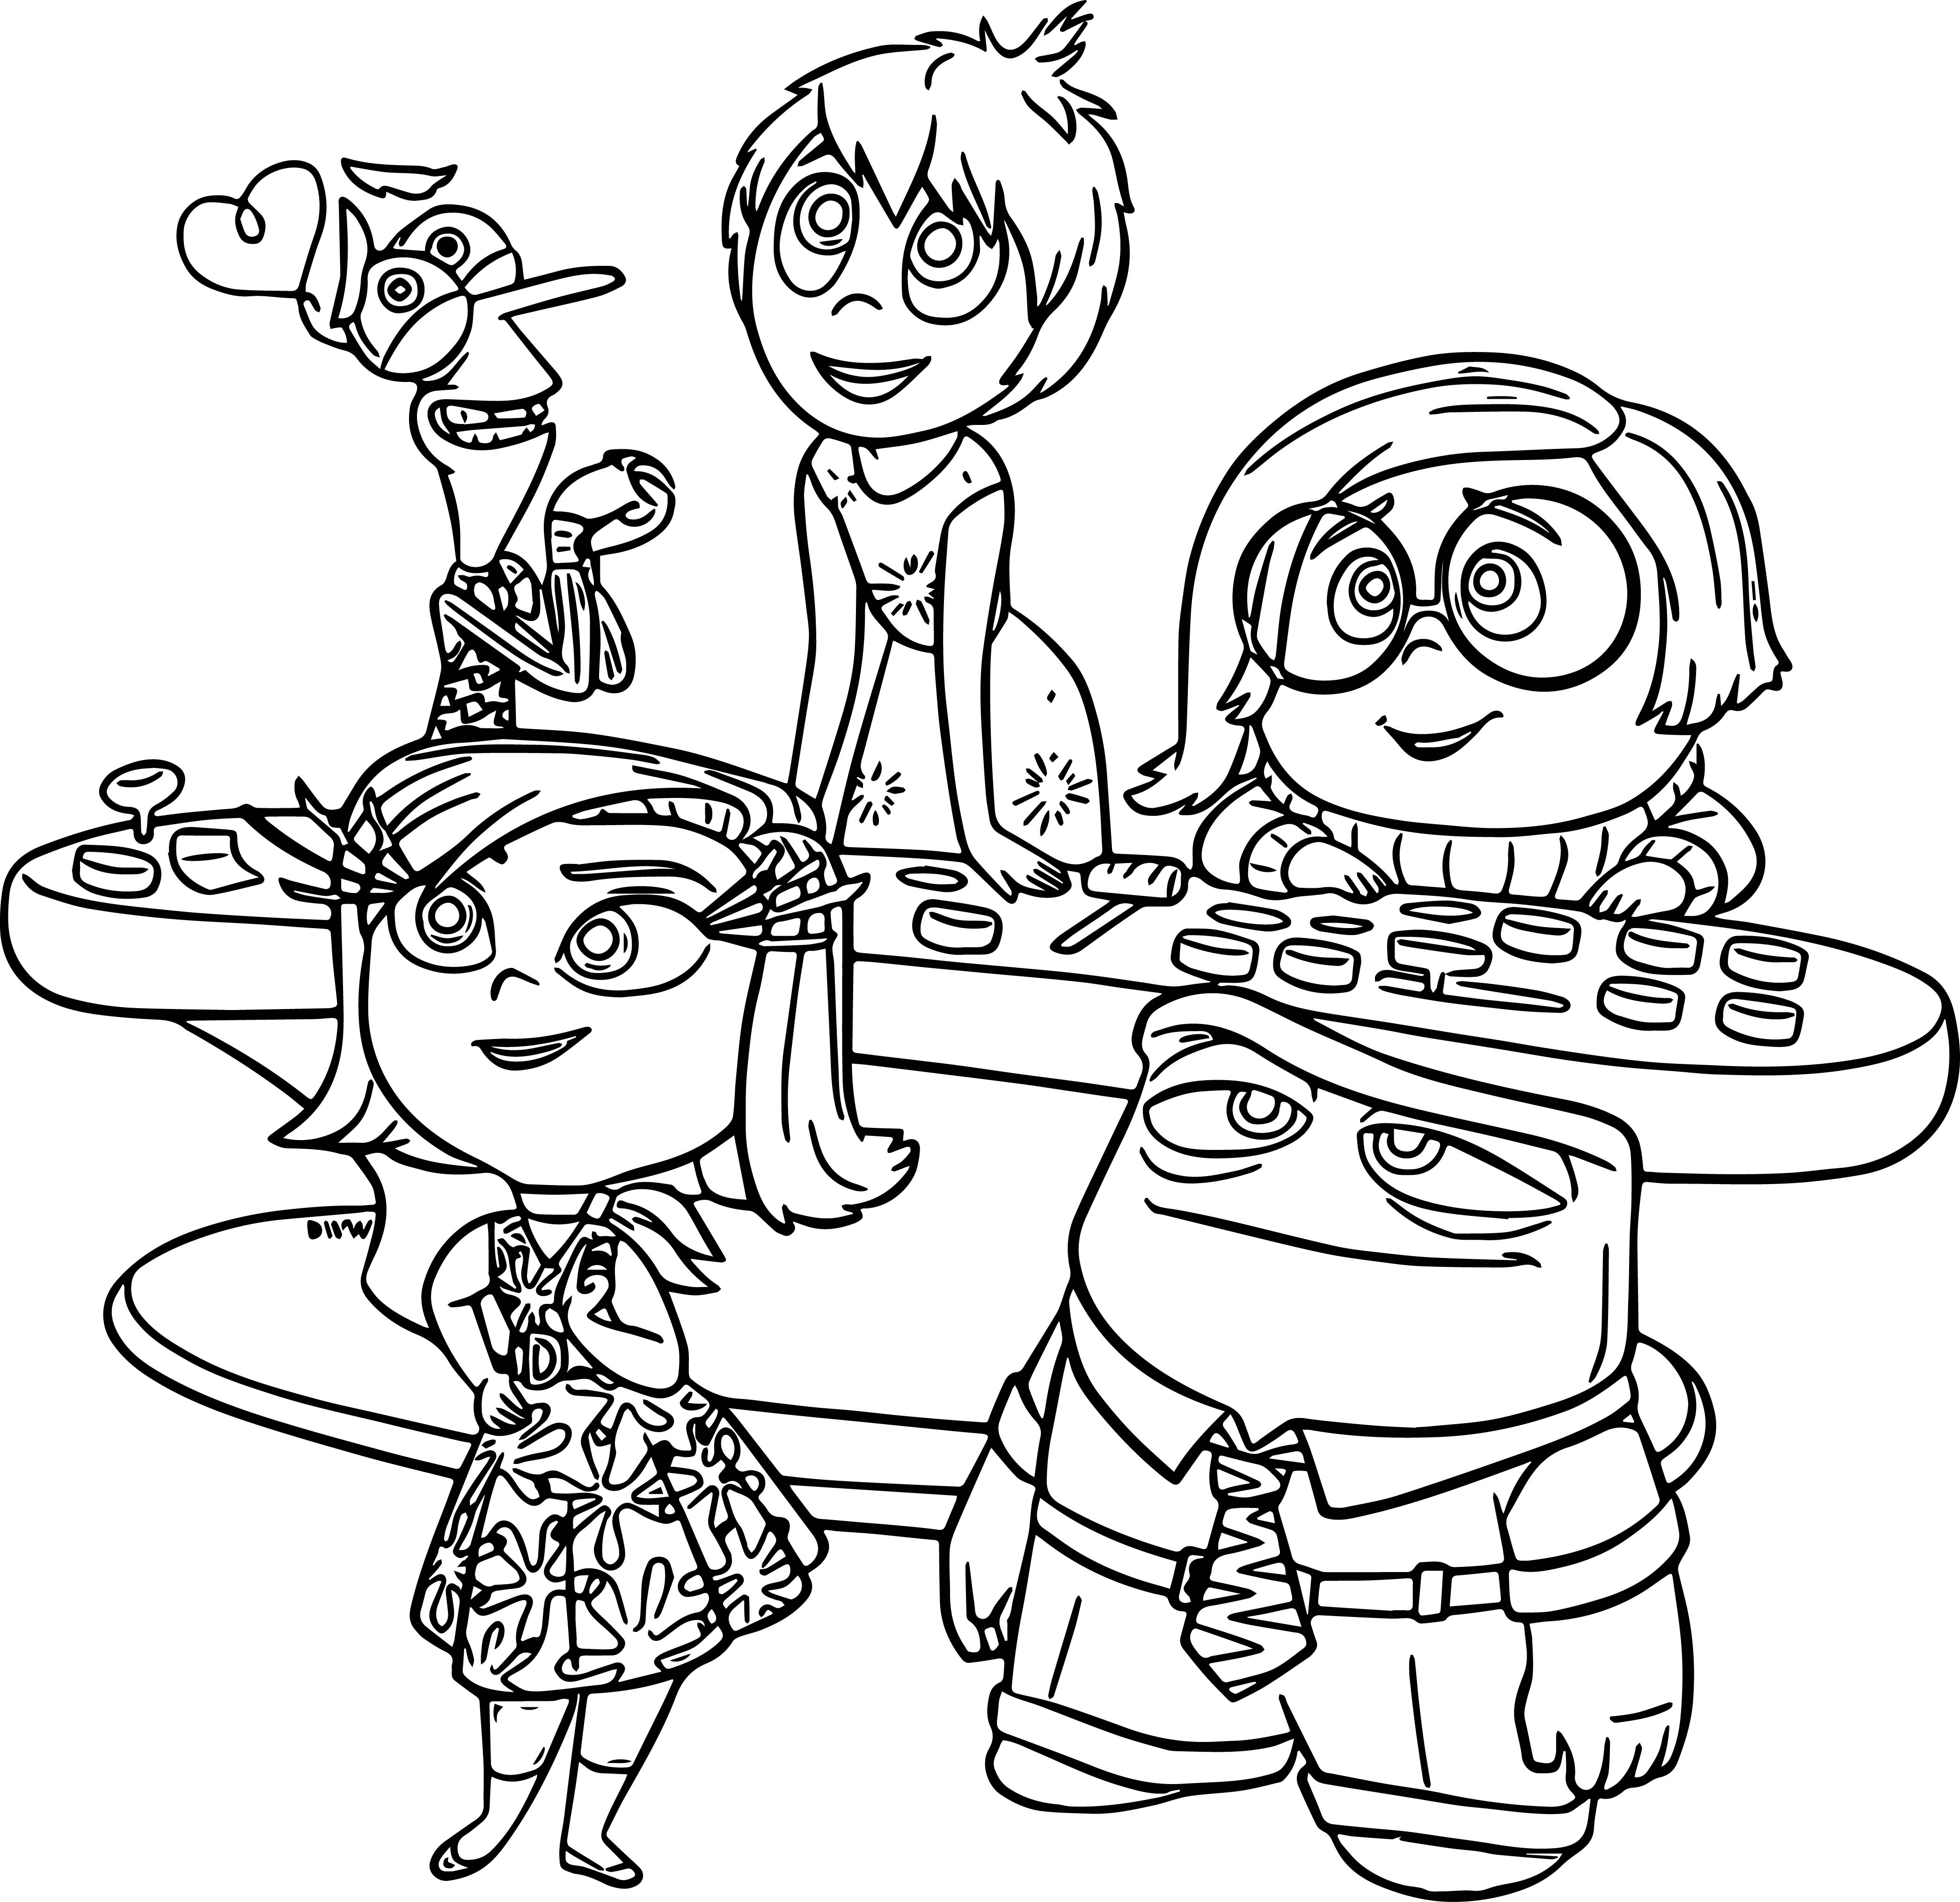 Pixar Inside out Coloring Pages